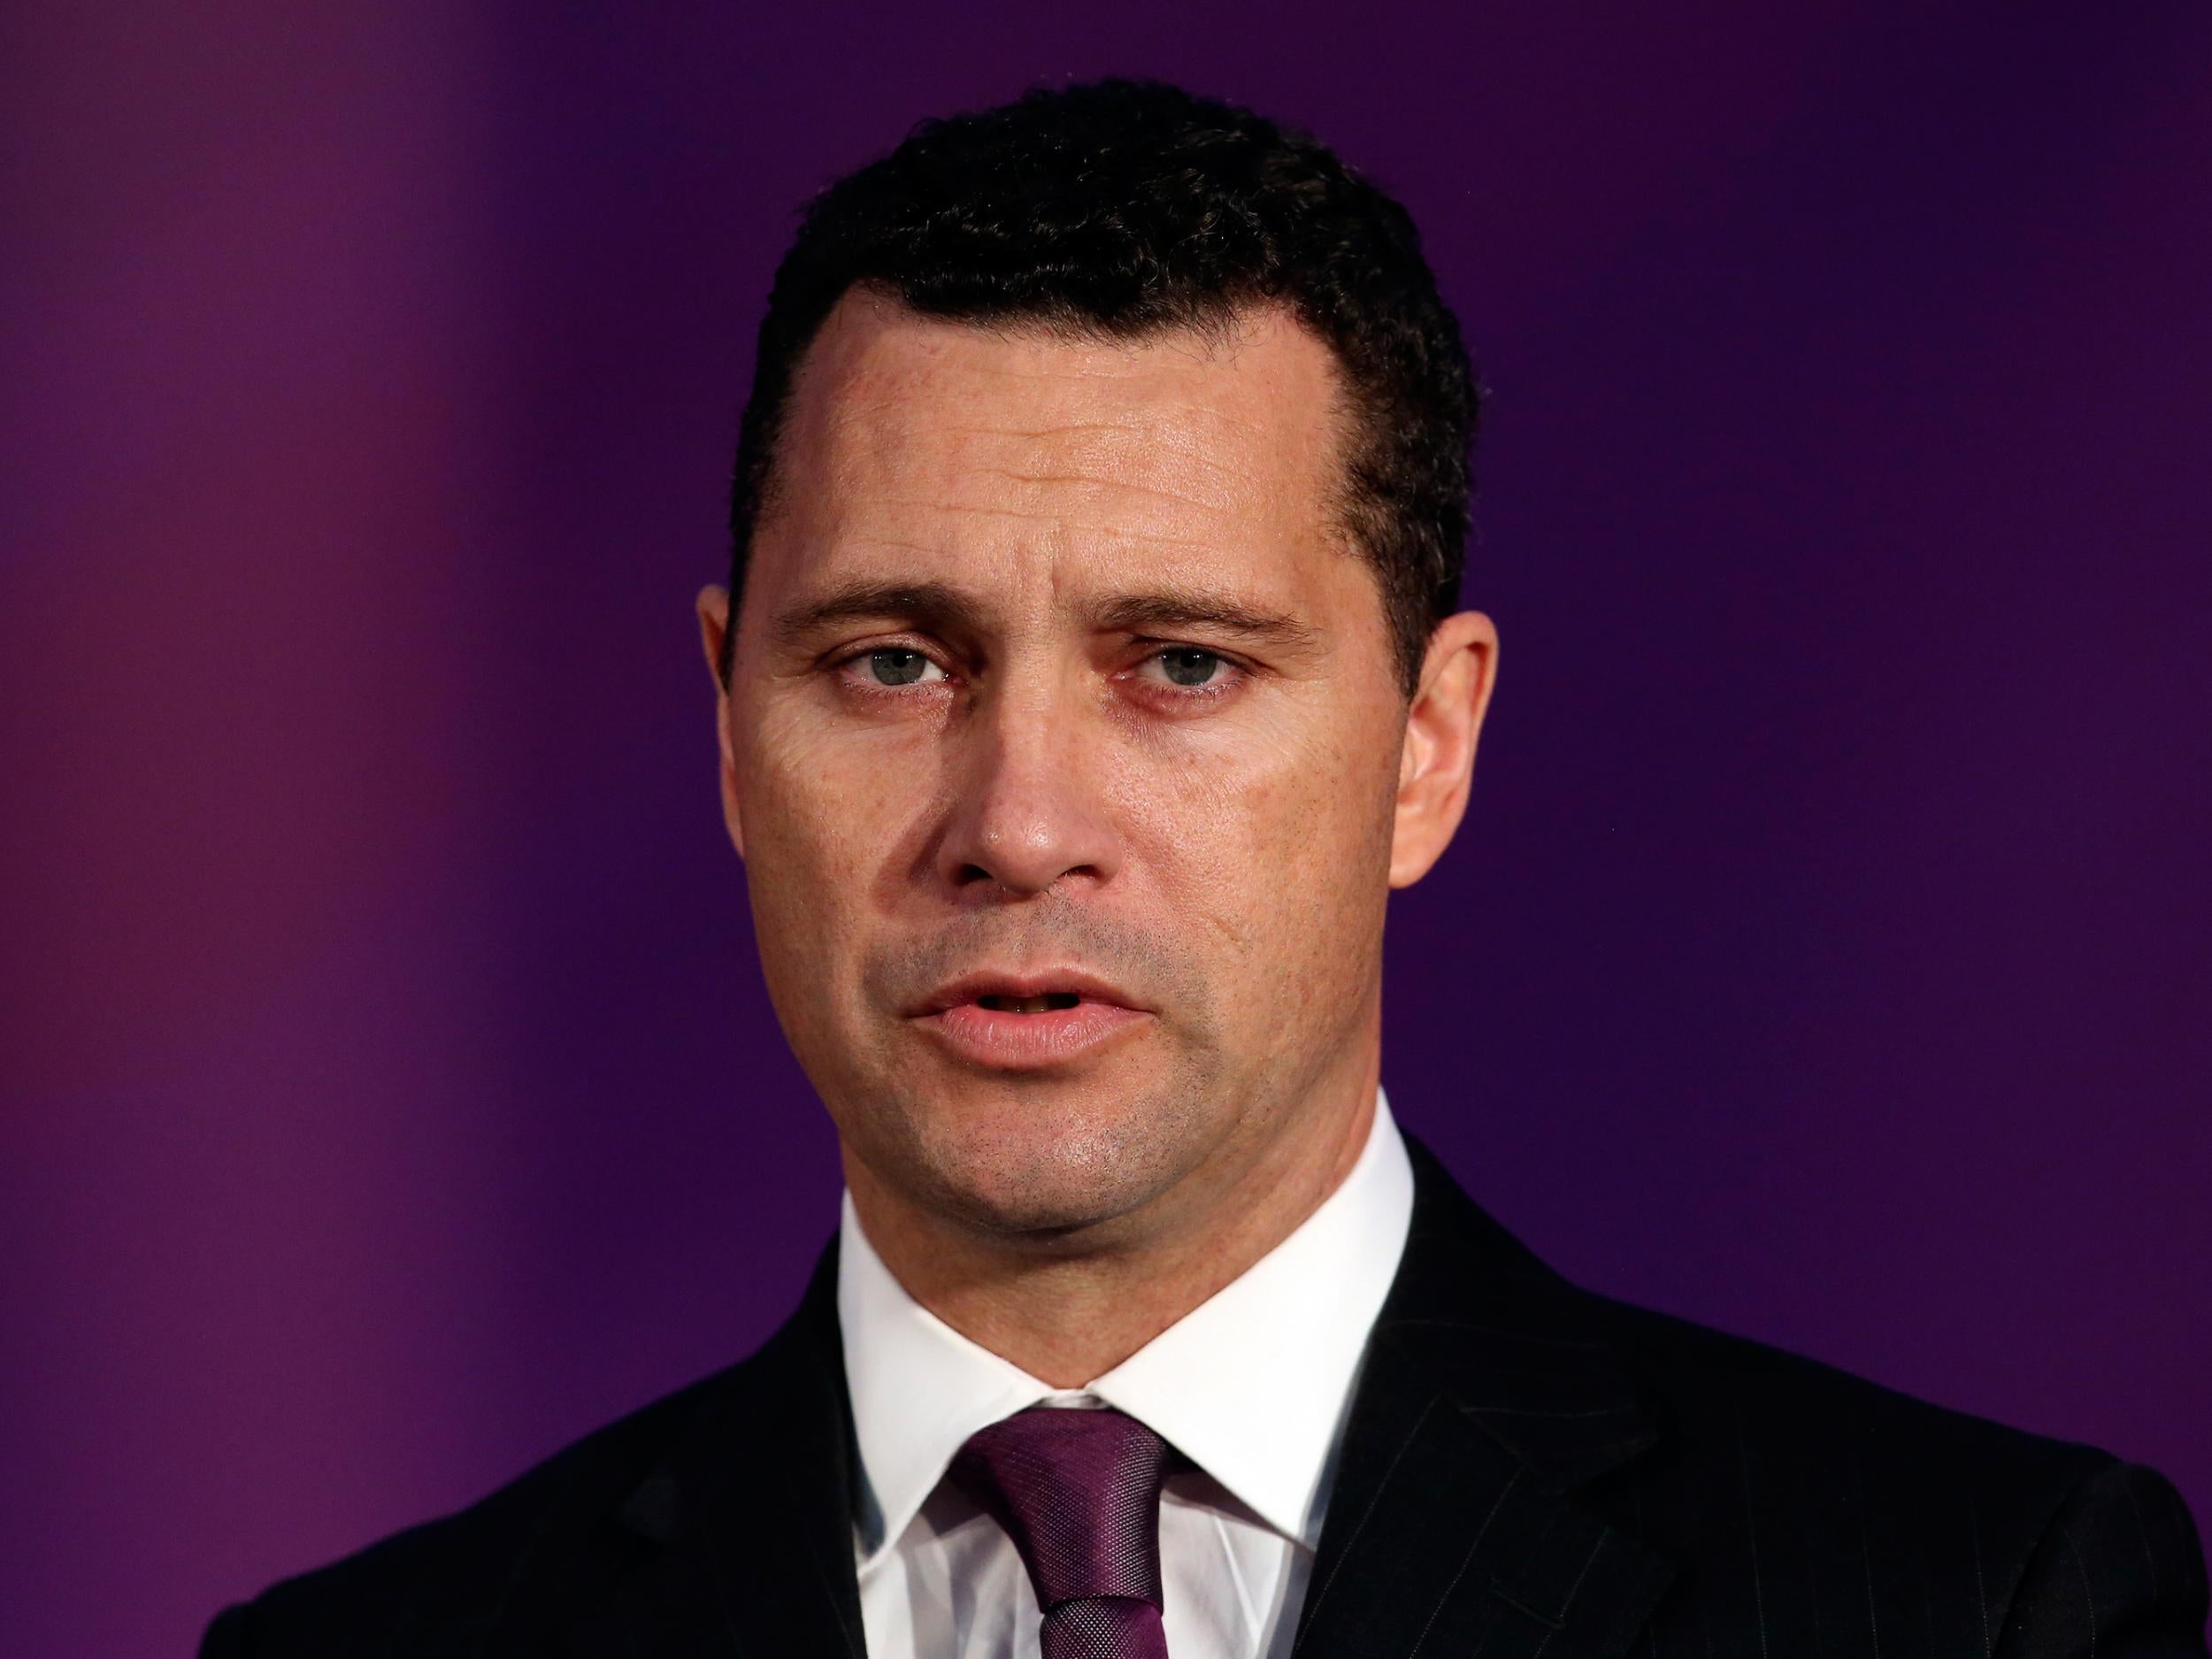 Mr Woolfe has also denied allegations that he allowed his membership to lapse in 2014